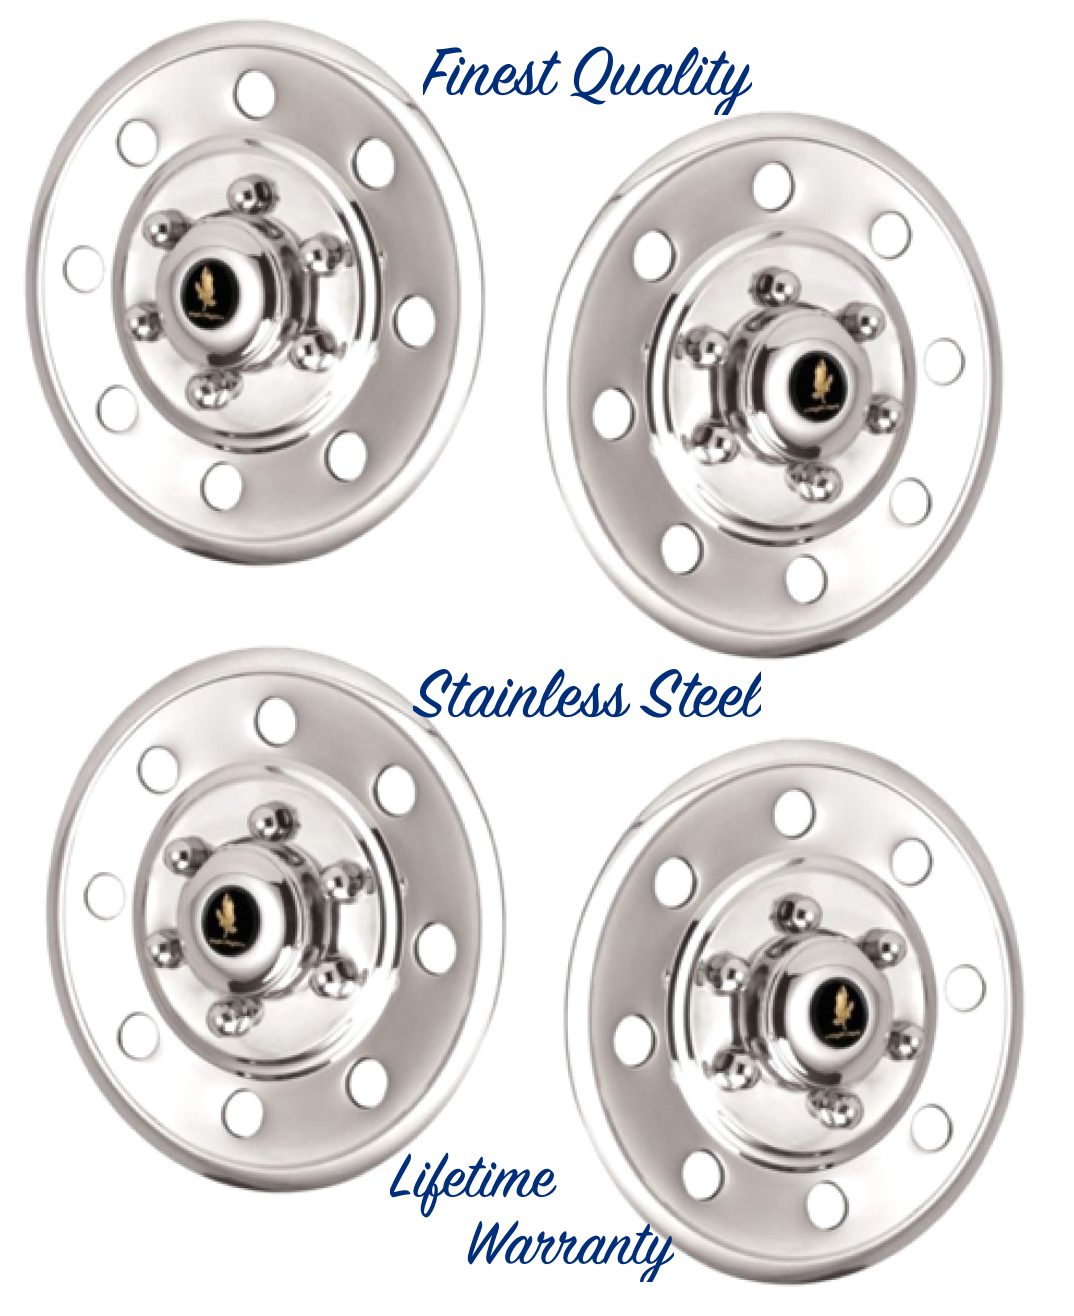 15" stainless steel wheel cover hubcaps for cars,
            trucks, trailers and vans